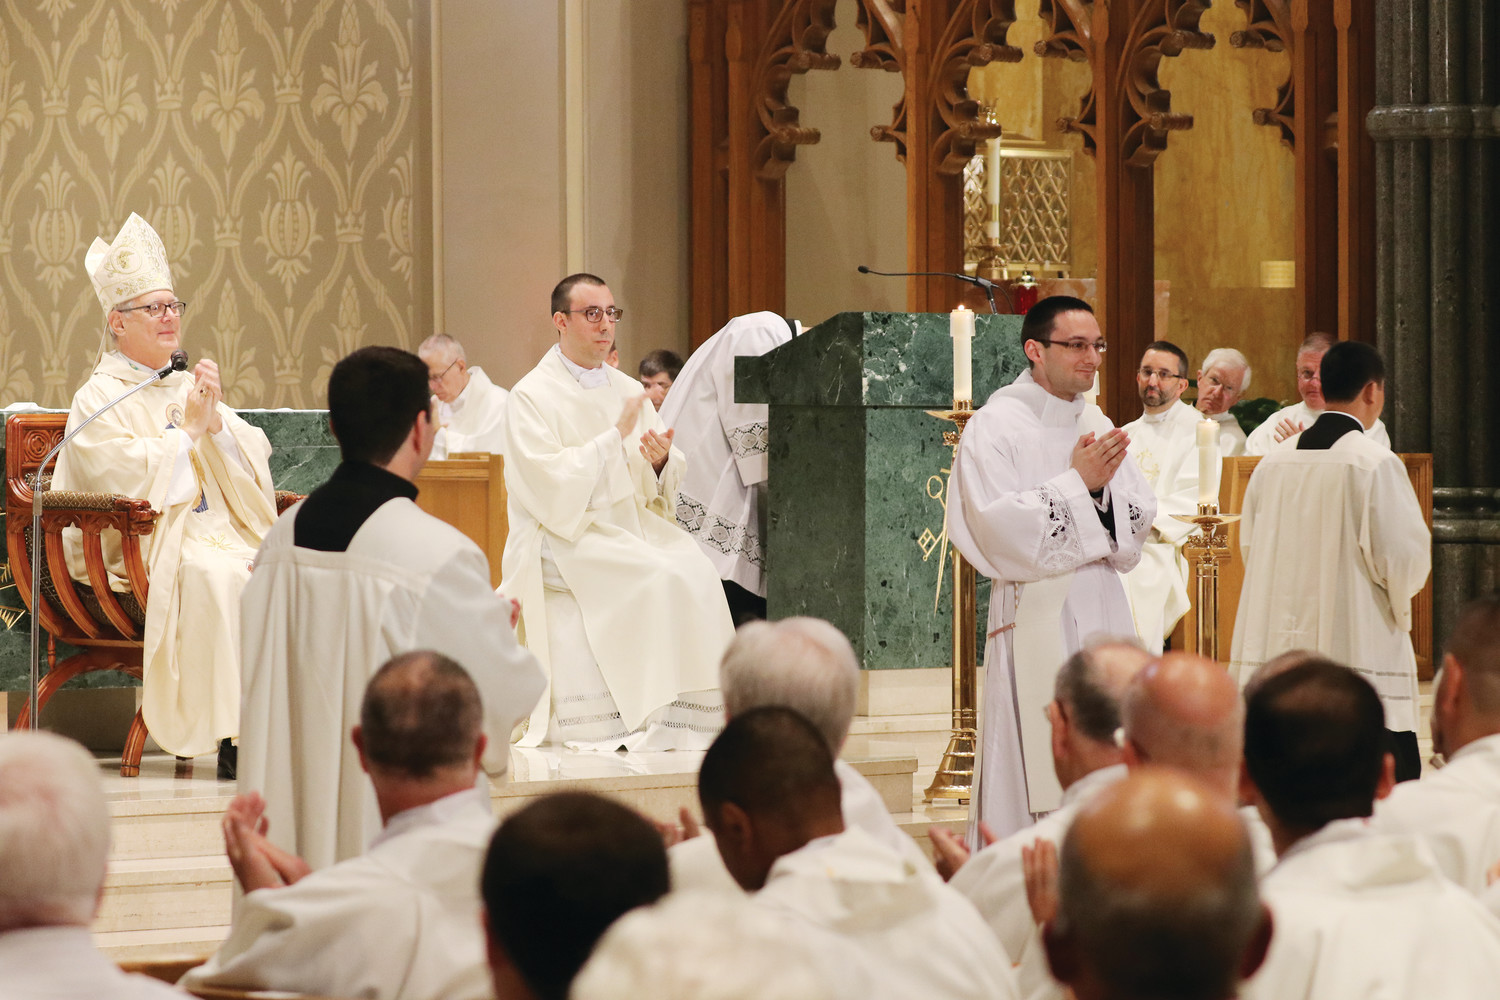 Bishop Tobin leads everyone in attendance in applauding Father Dufour on the occasion of his ordination to the priesthood.